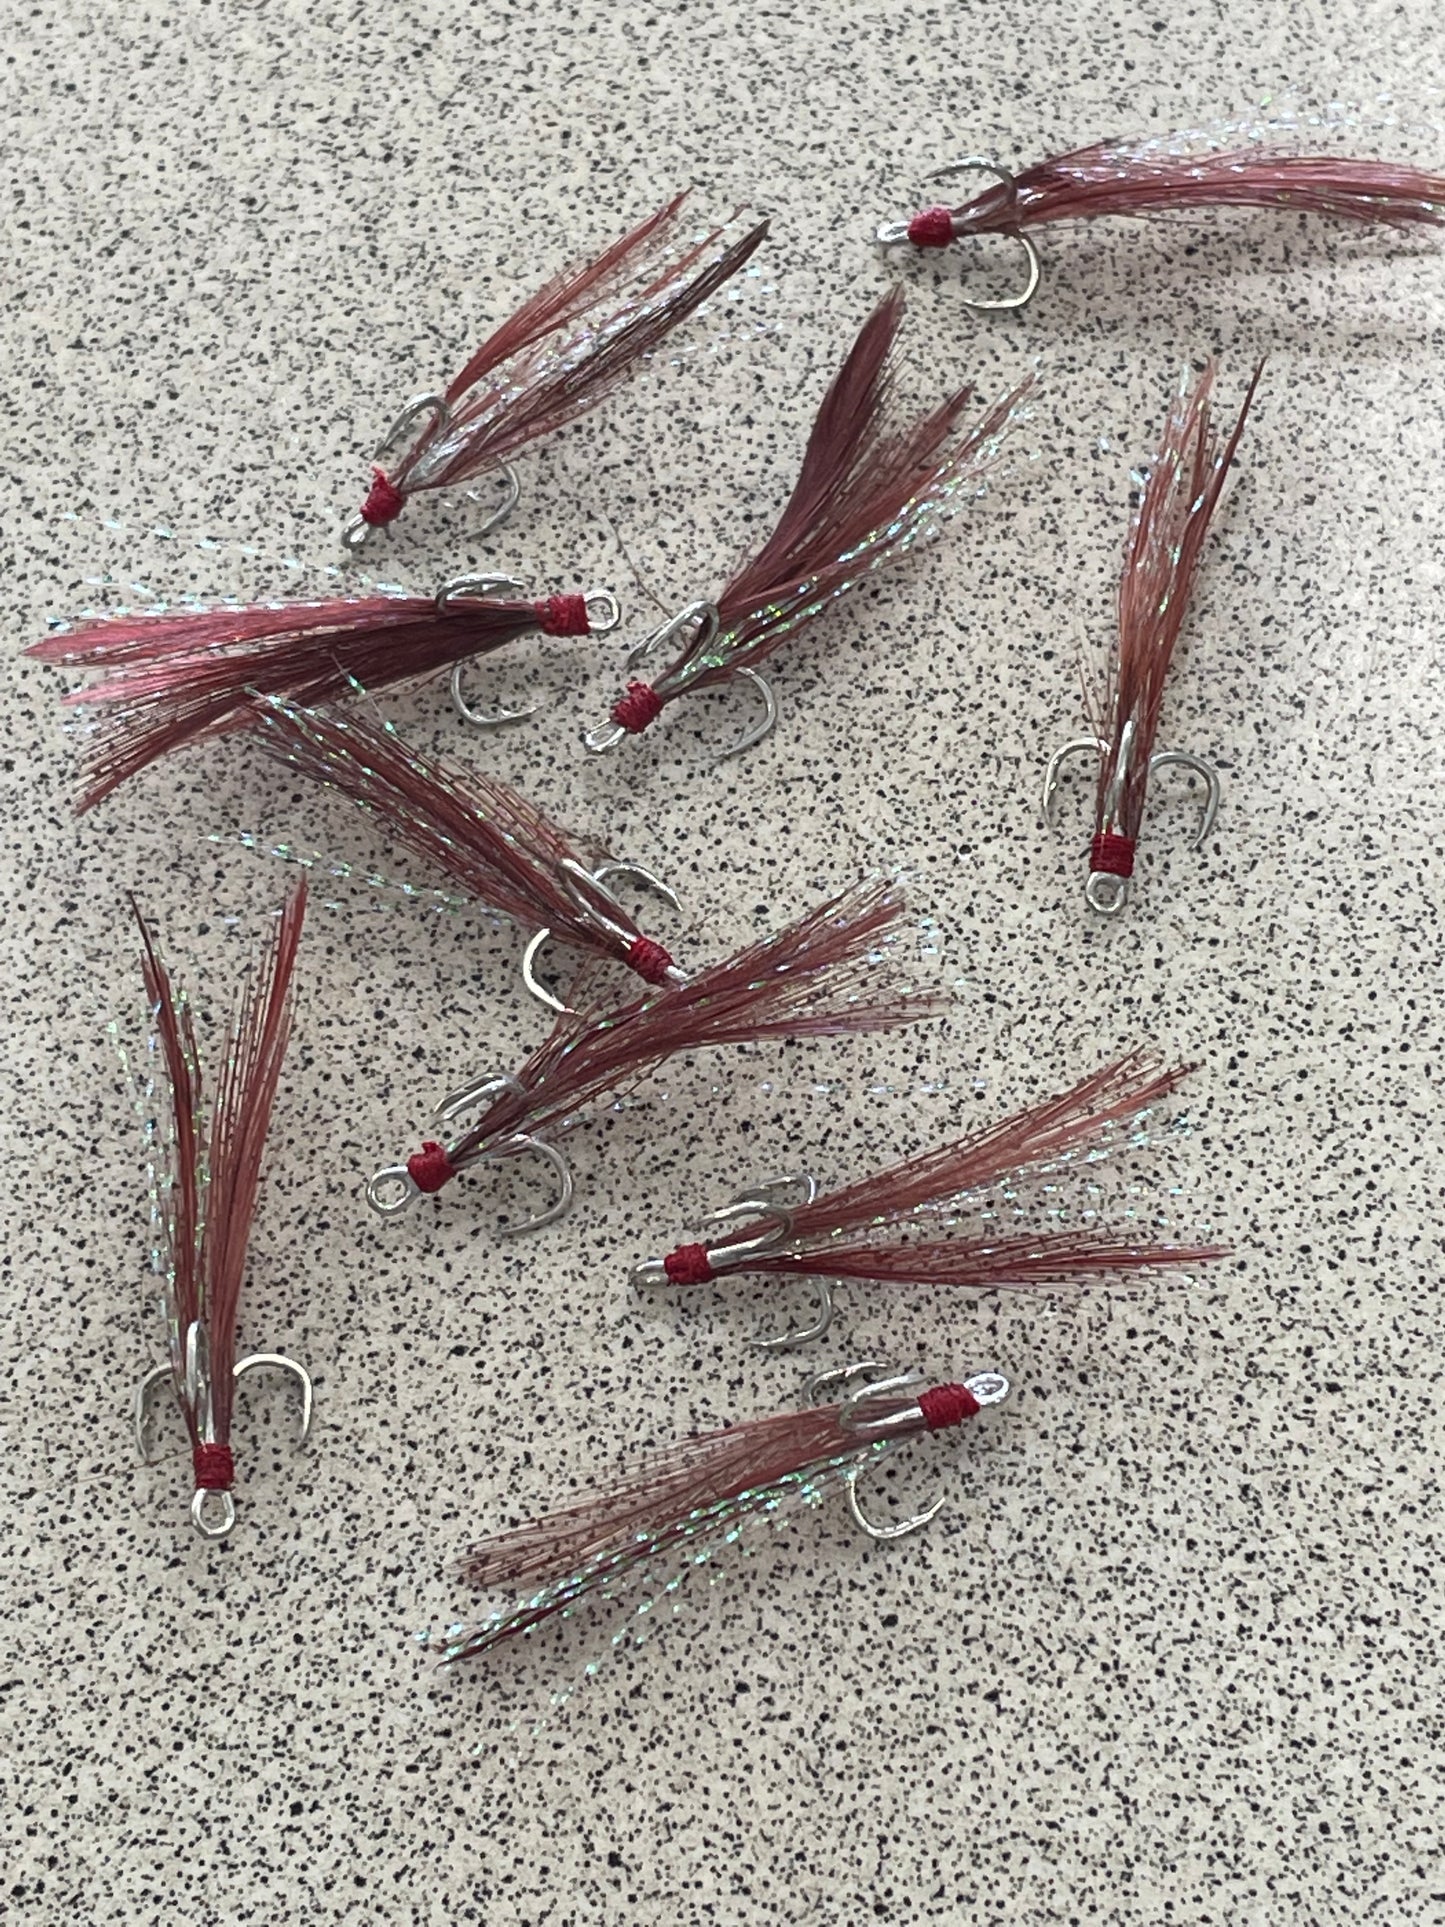 Dressed Treble Hooks - Red #10 (5pc) – Trophy Trout Lures and Fly Fishing